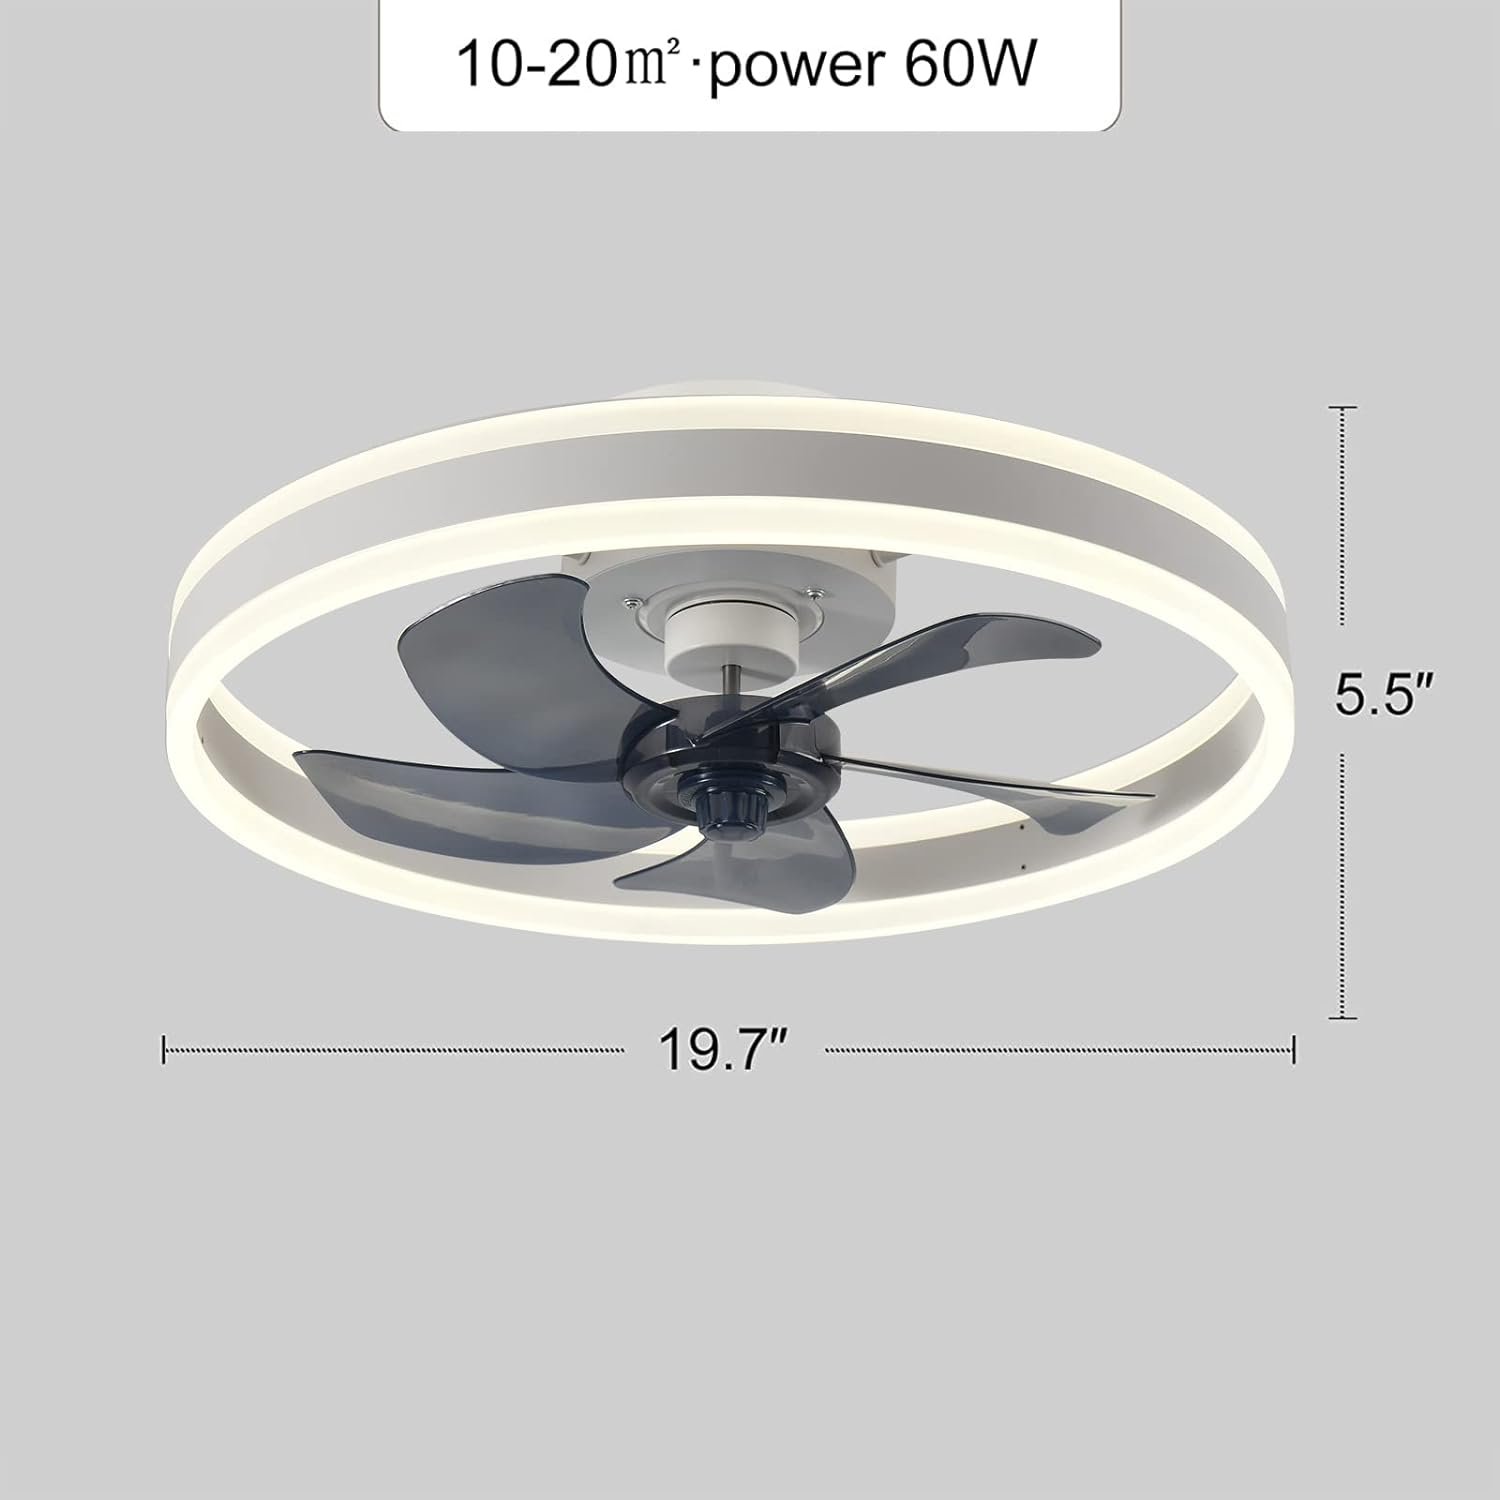 AHAWILL Fandelier Ceiling Fans with Lights and Remote,Modern Flush Mount Ceiling Fan with Light 6 Speeds Timing,Low Profile Ceiling Fans for Bedroom,Study,Dining Room,etc.(19.7 White)